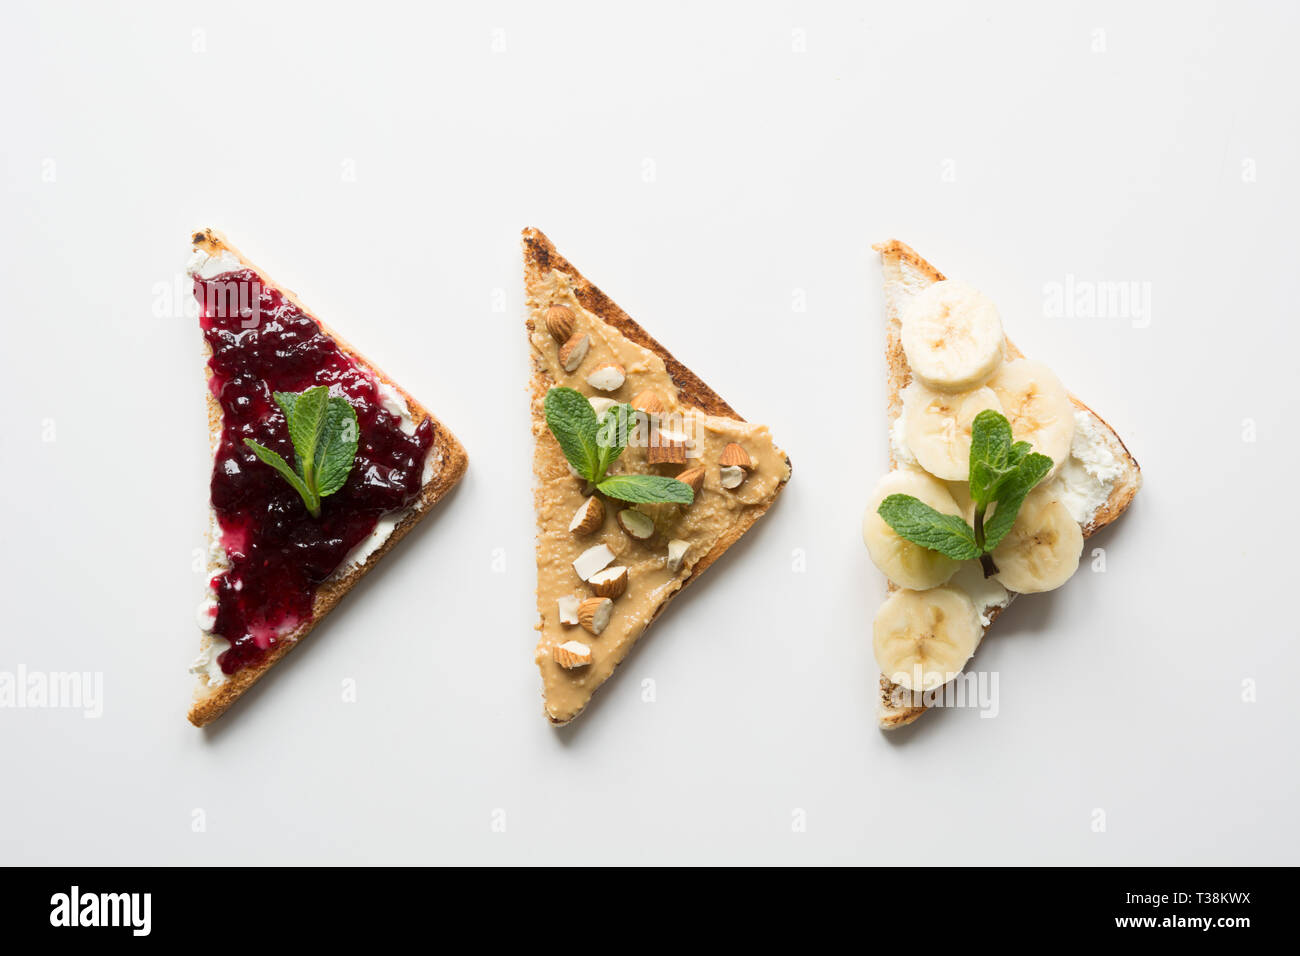 Different types of sandwiches for healthy children's breakfast without sugar, with nut paste, bananas, berry jam. View from above. Stock Photo